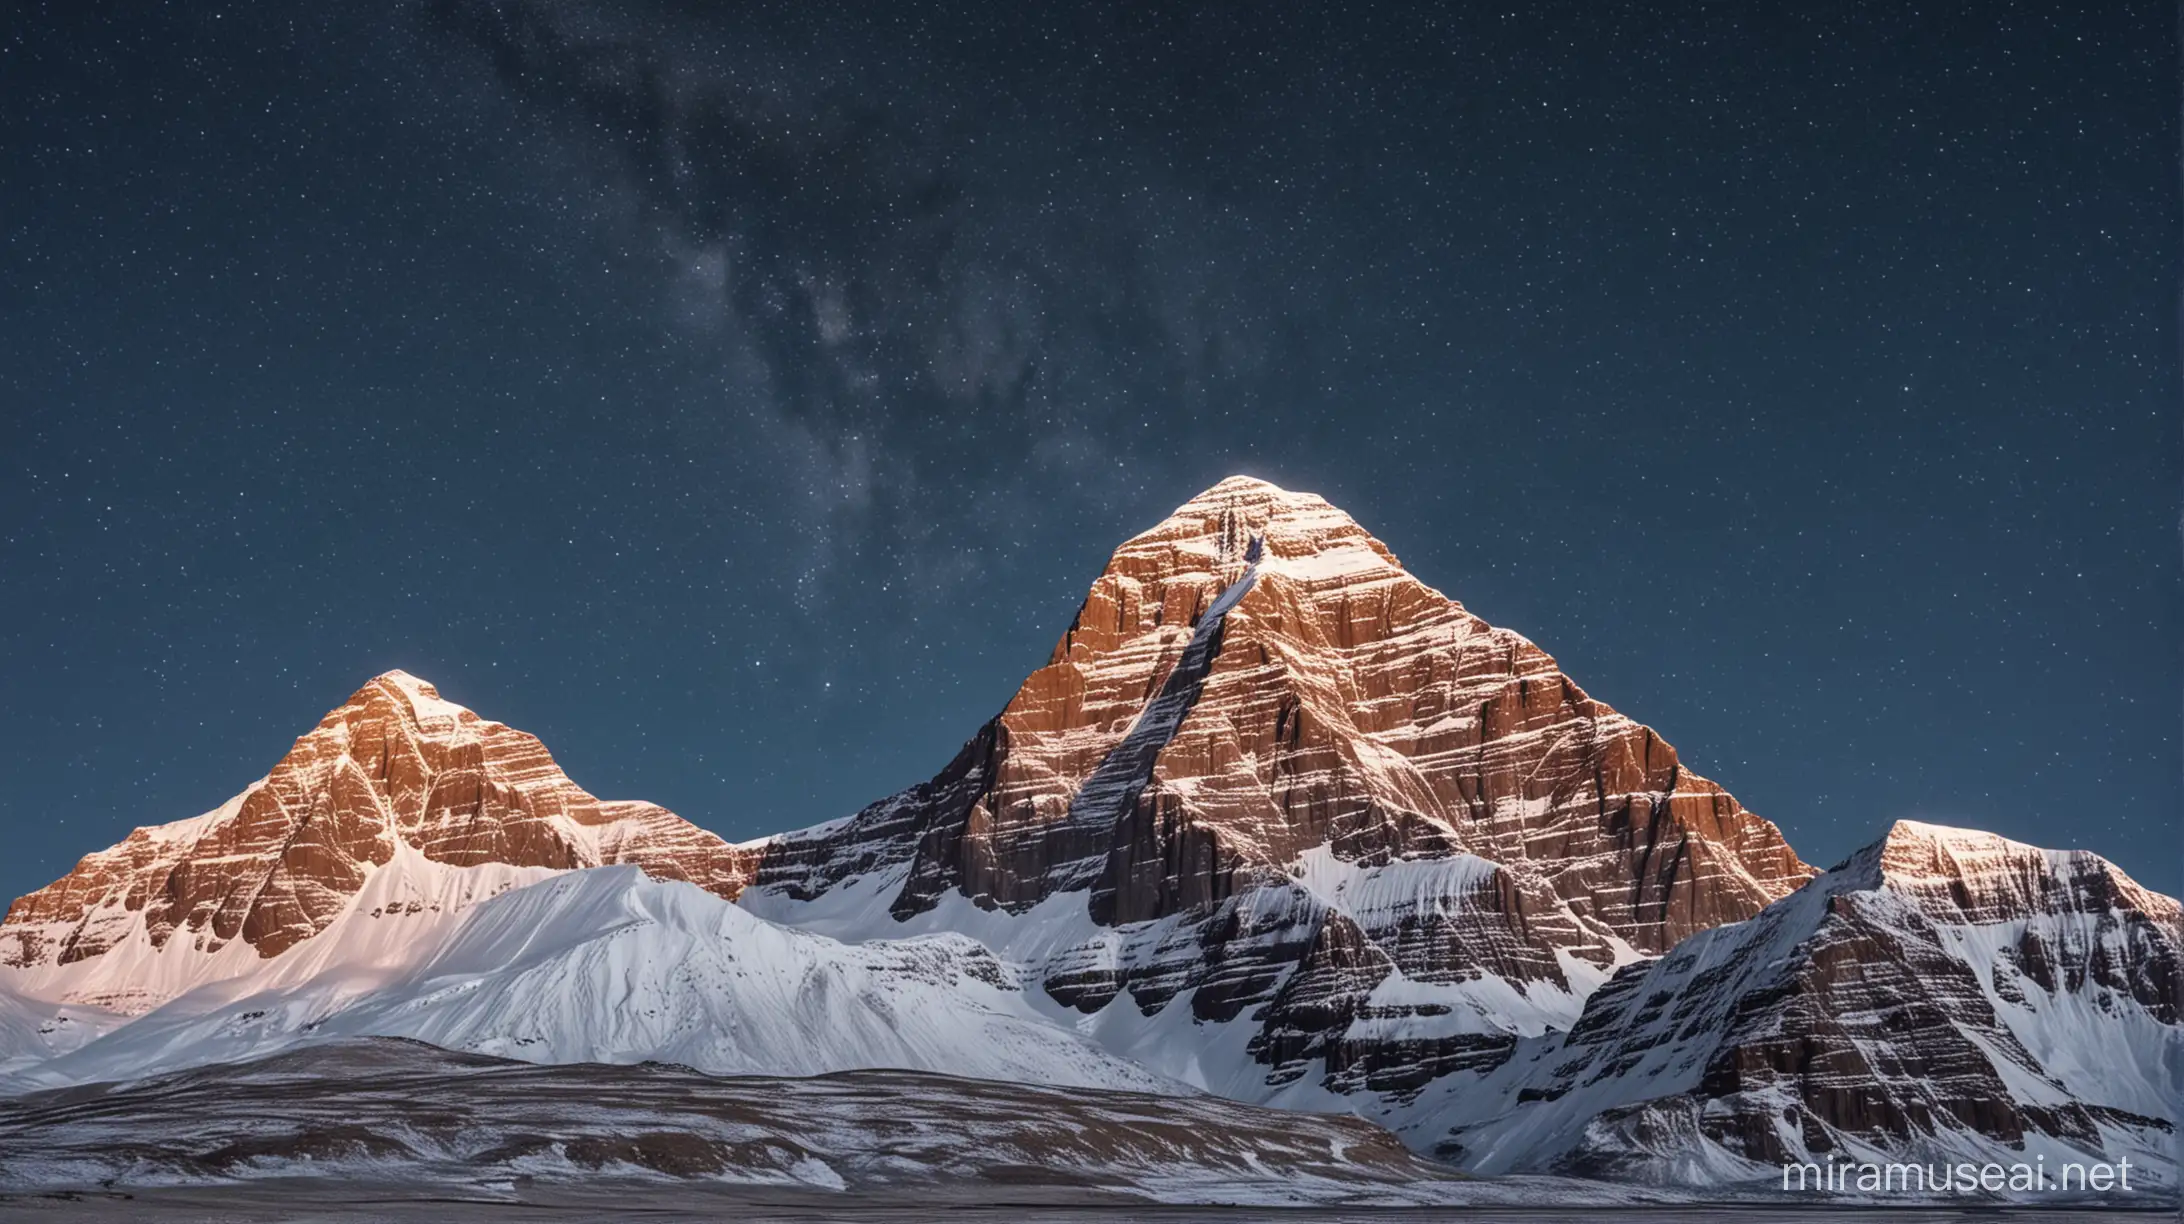 wide shot, ranges of mount kailash, night sky, stars, long snow clad mountain ranges